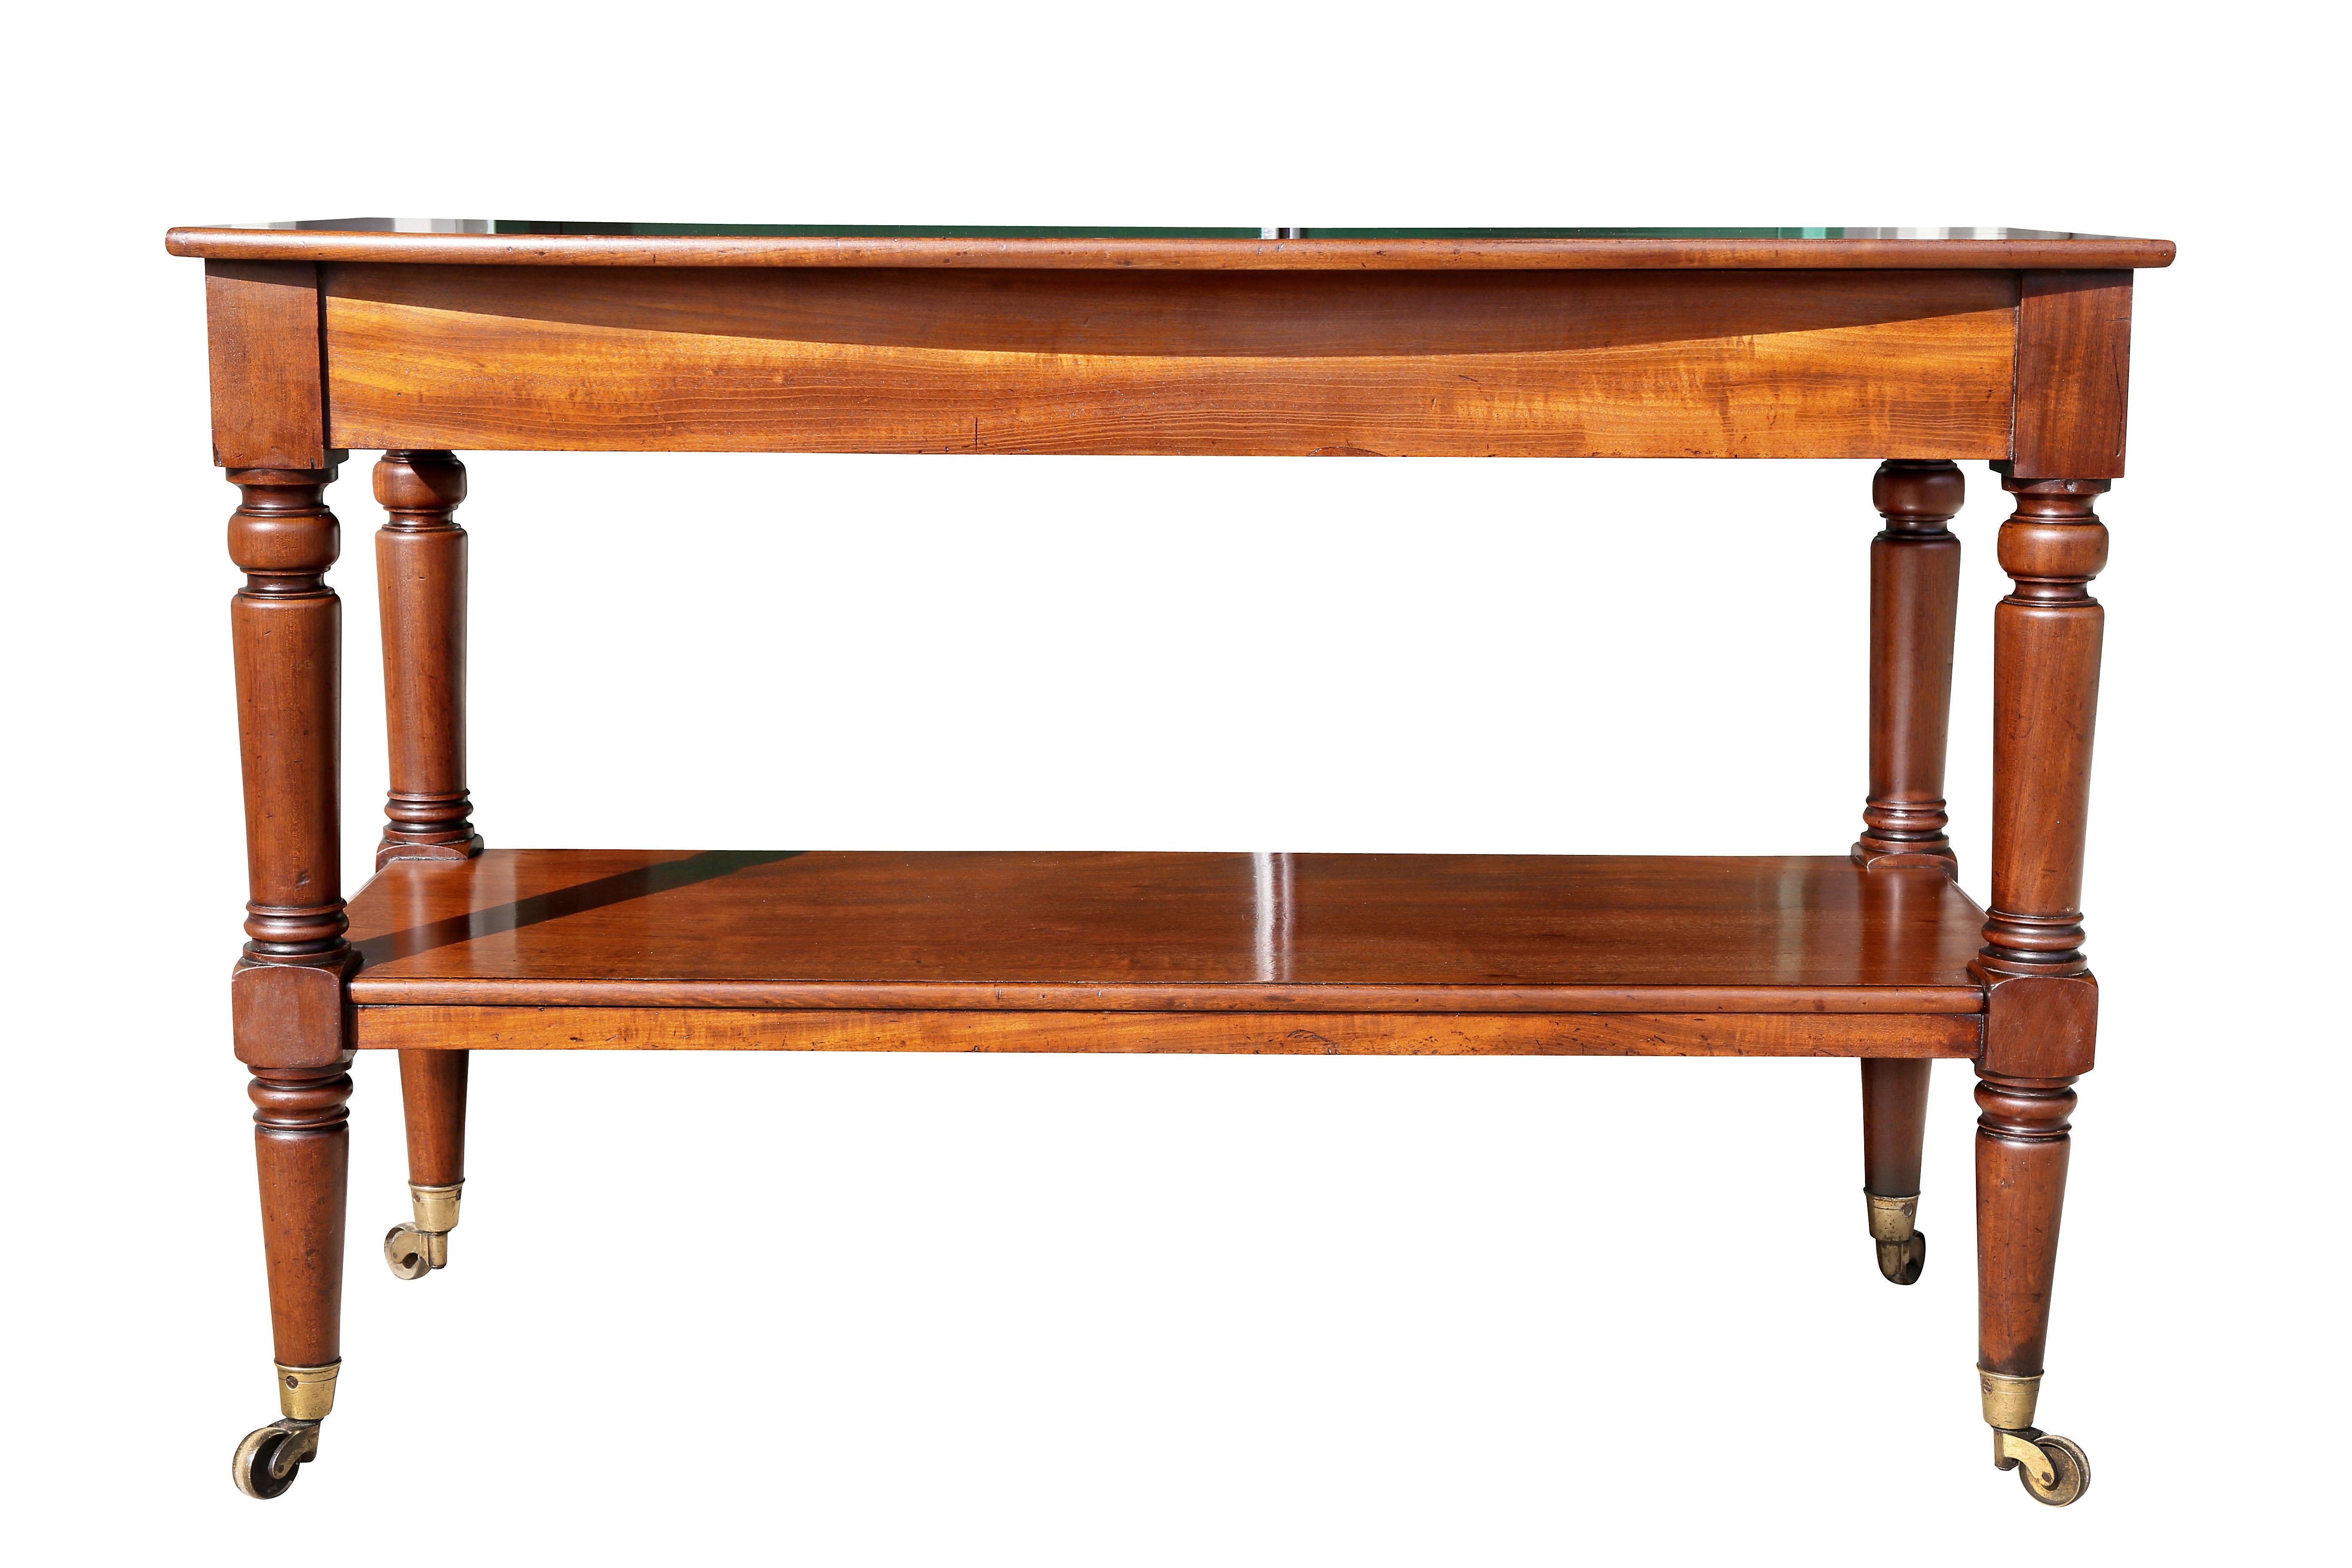 With bowed top with drawers at either end over a shelf, all with turned legs ending on casters.